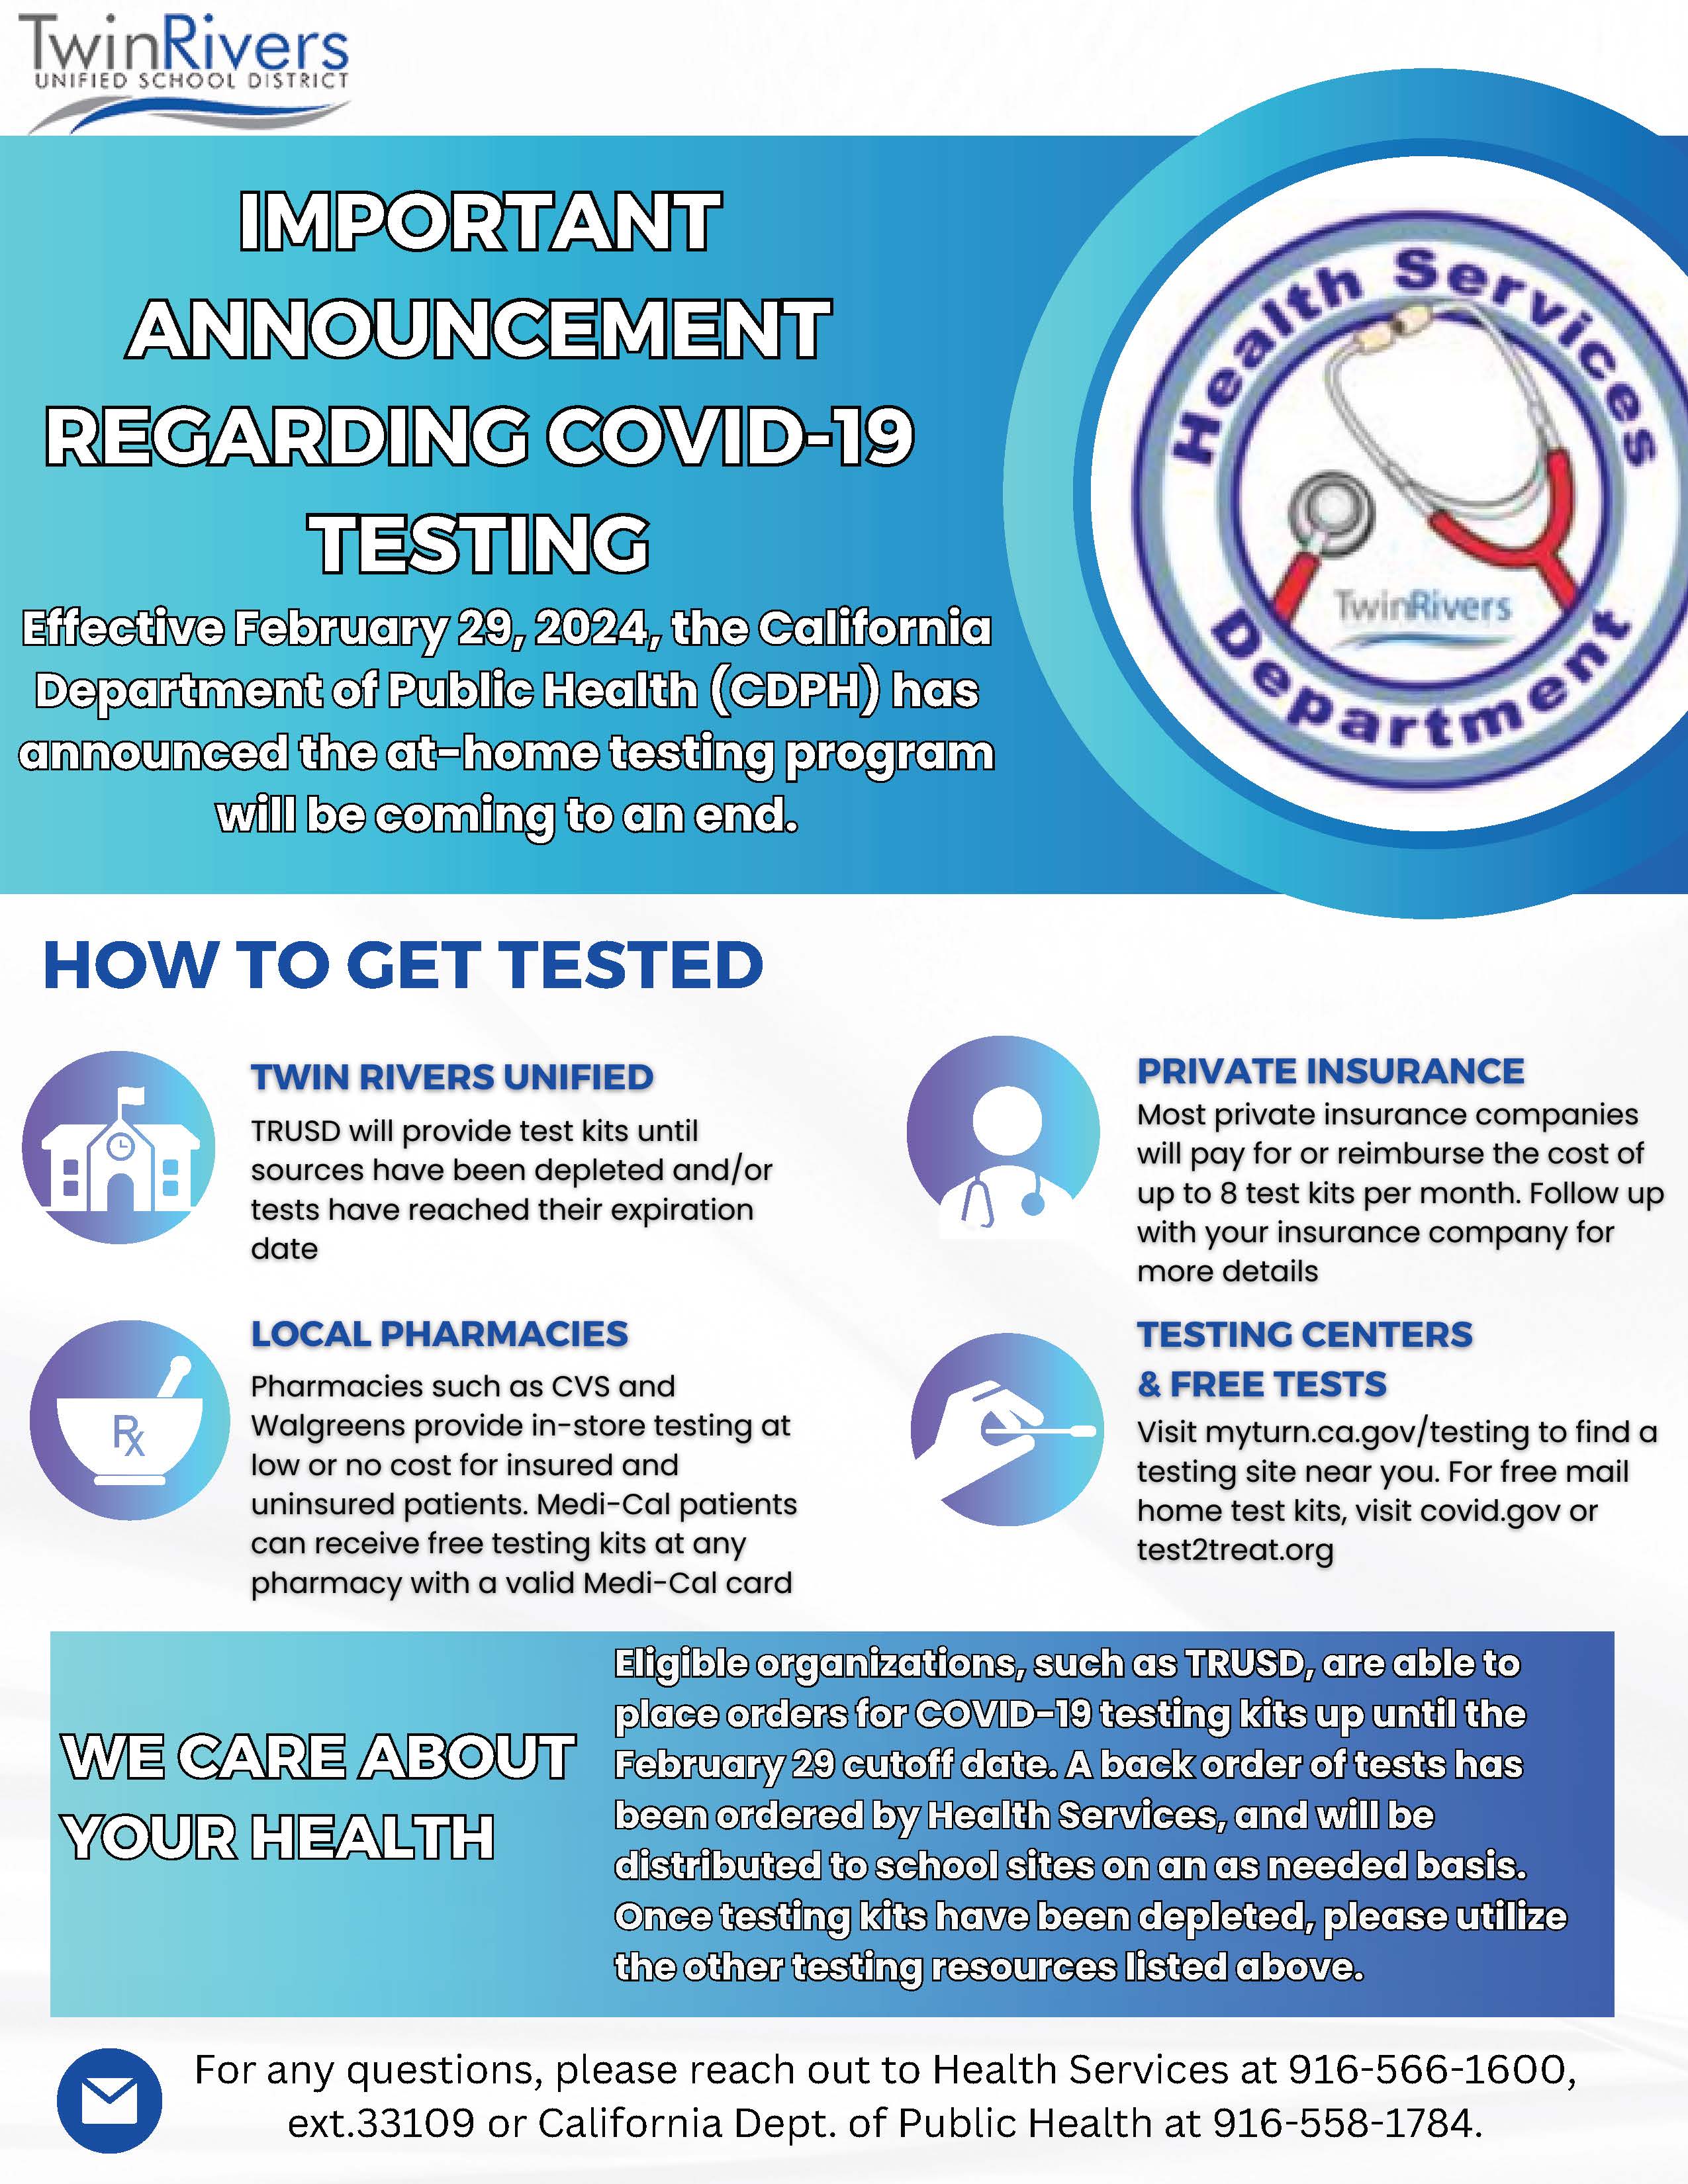 Flyer informing public of end of the at-home covid test program on February 29, 2024.